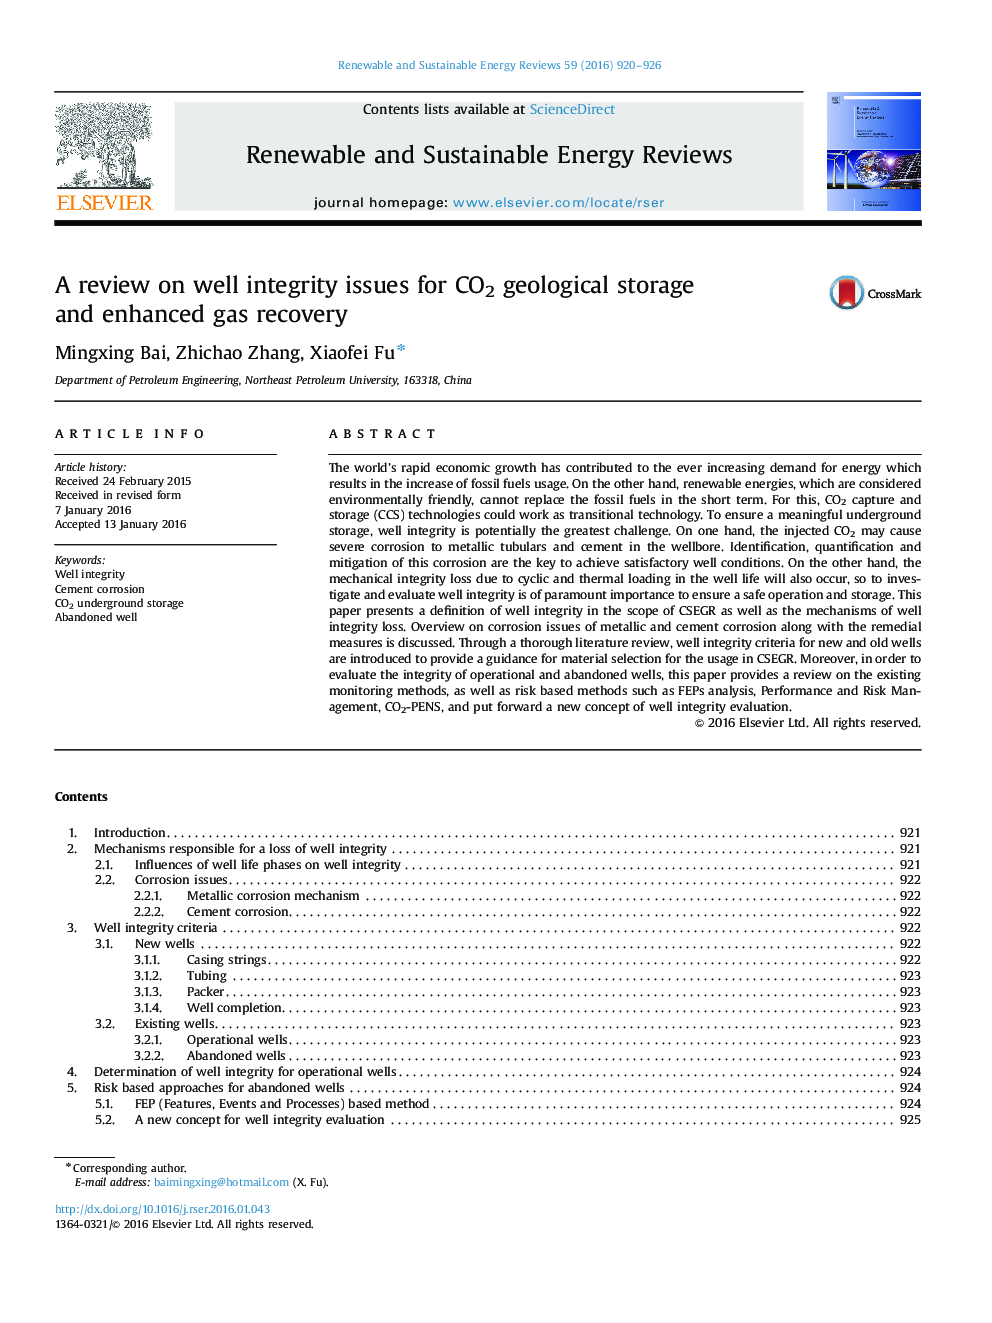 A review on well integrity issues for CO2 geological storage and enhanced gas recovery